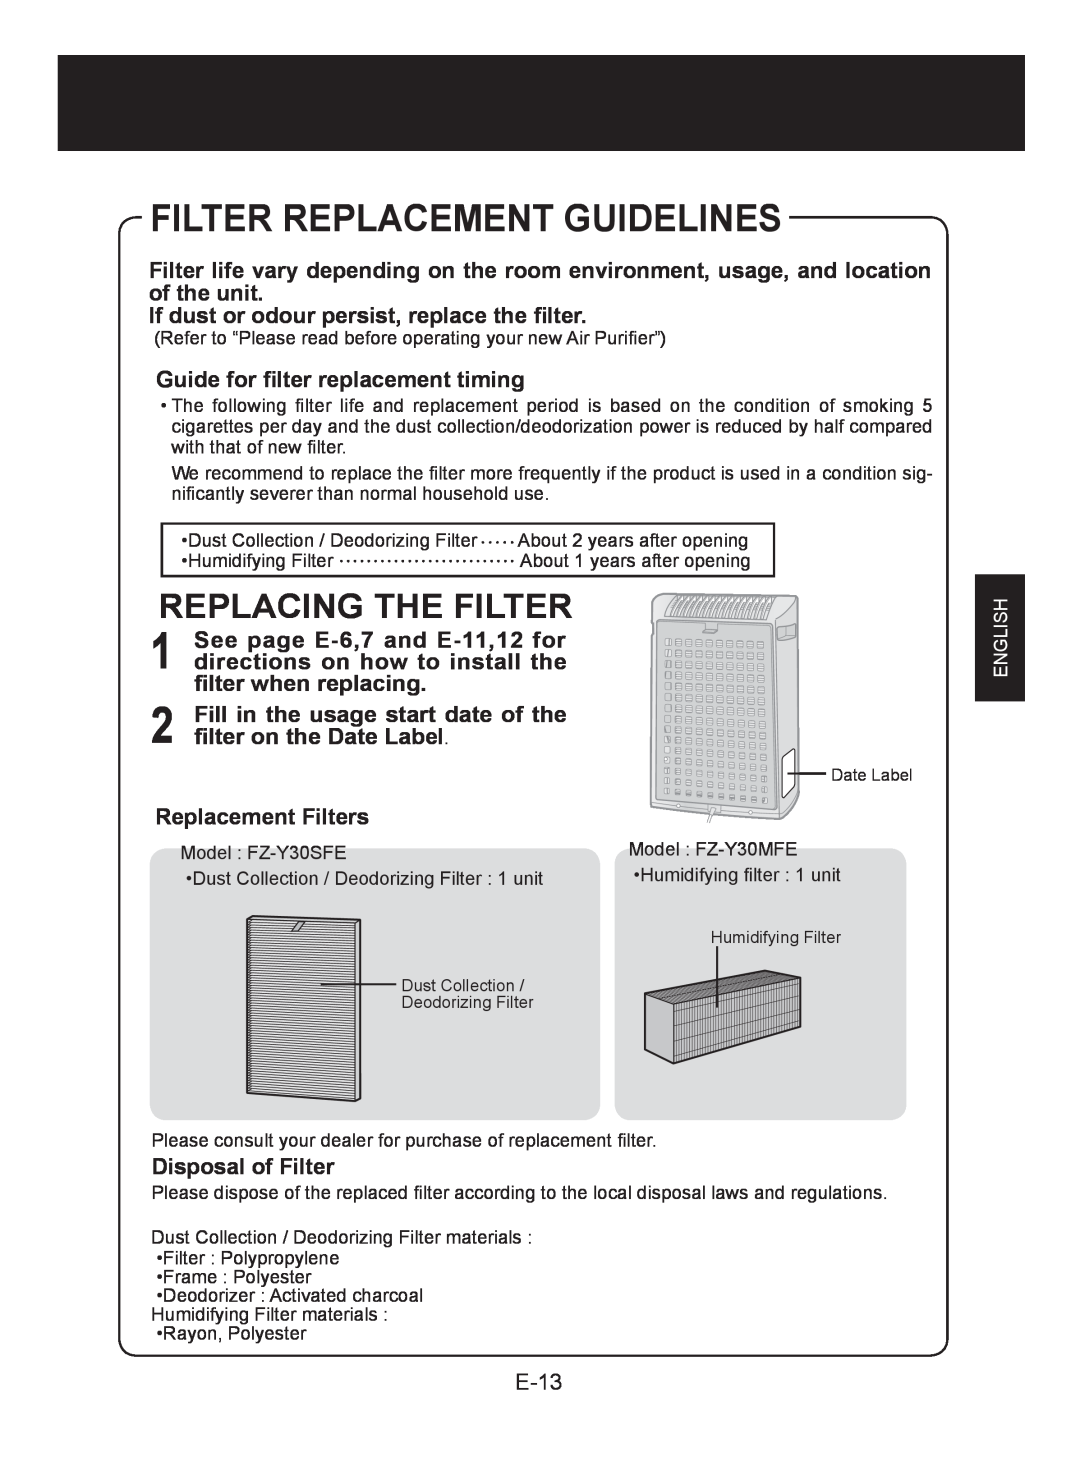 Sharp KC-930E Filter Replacement Guidelines, Replacing The Filter, If dust or odour persist, replace the ﬁlter, E-13 